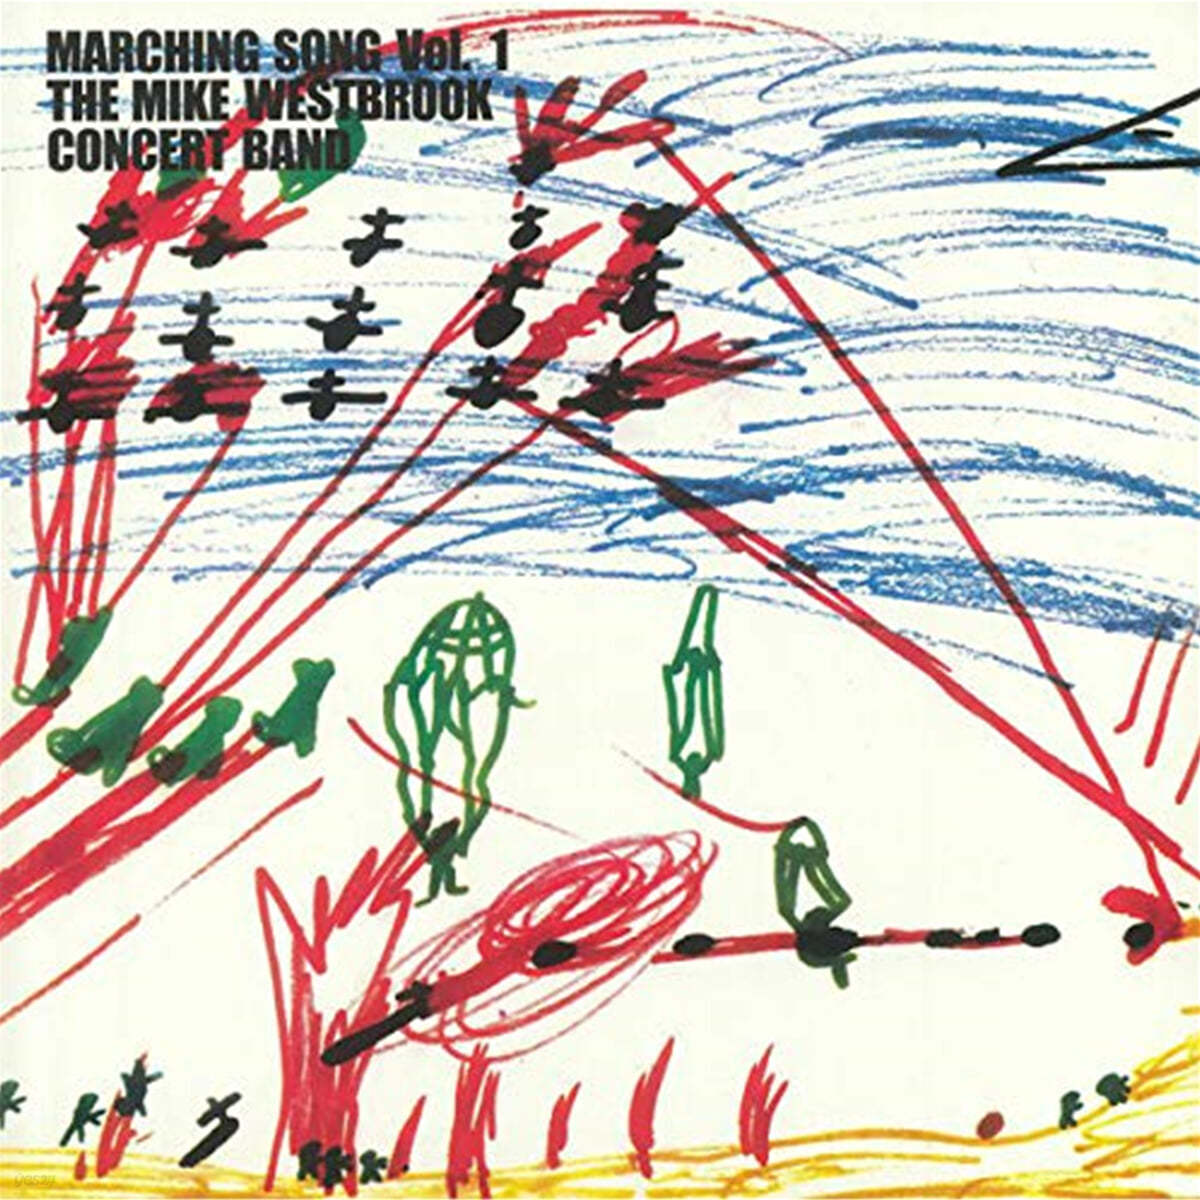 Mike Westbrook Concert Band (마이크 웨스트브루크 콘서트 밴드) - Marching Song Vol. 1 [LP] 